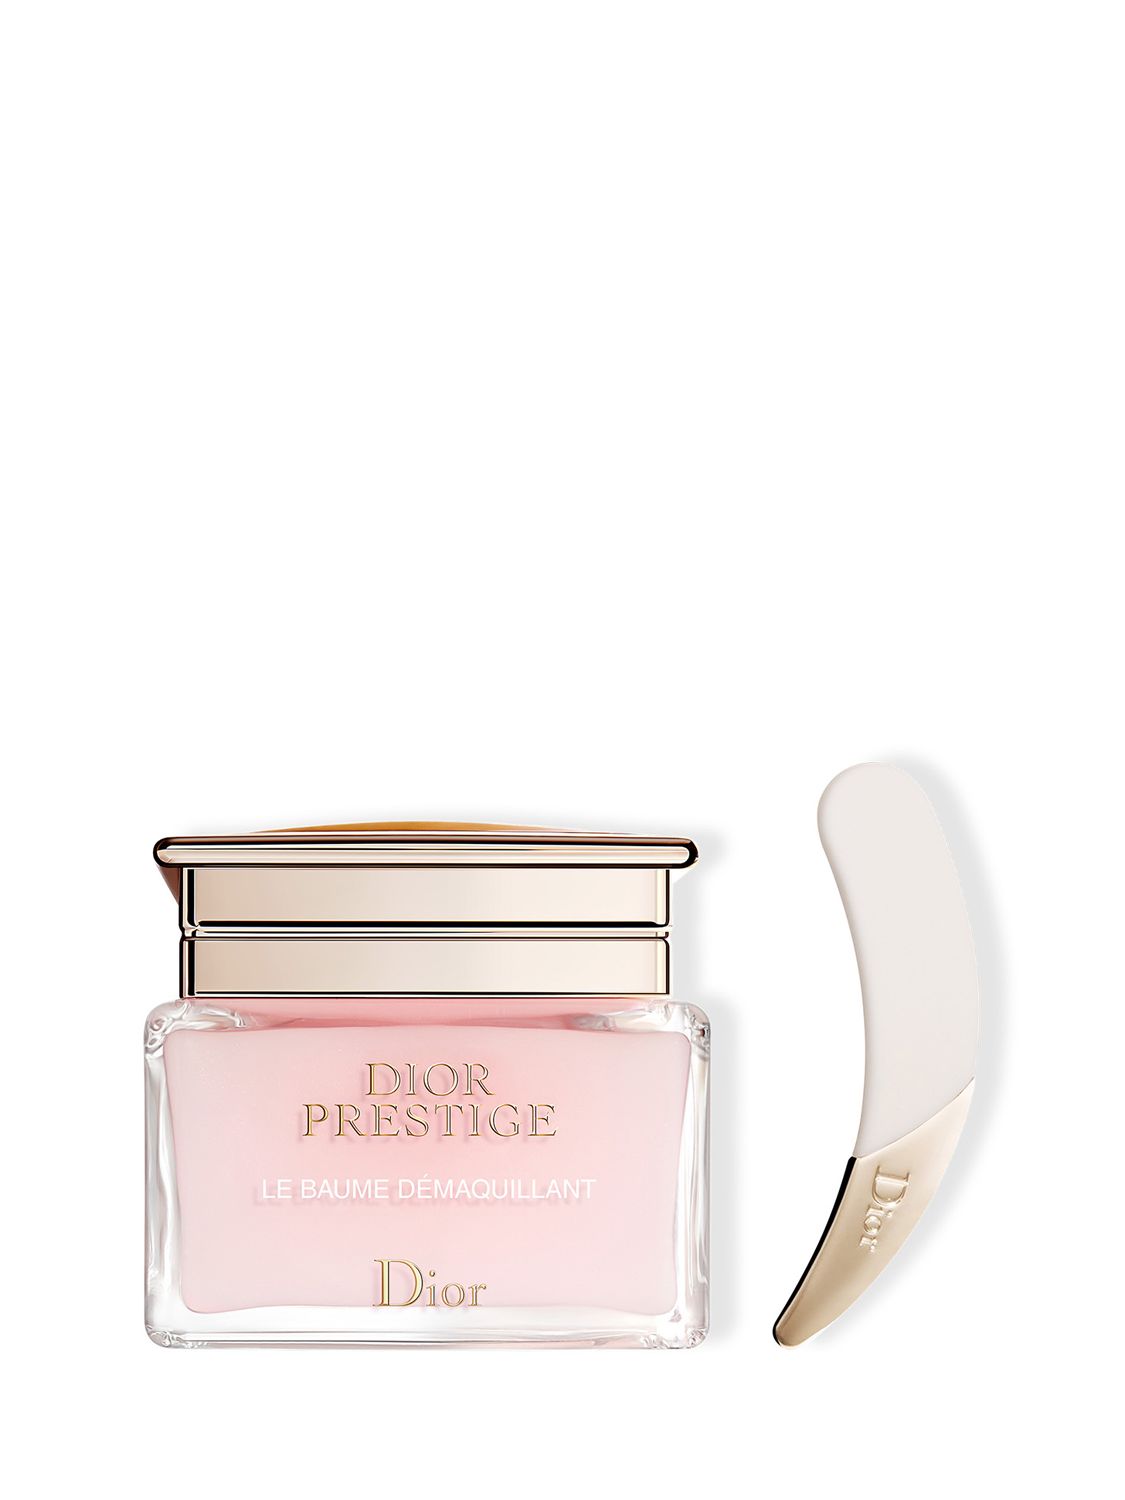 DIOR Prestige Le Baume Démaquillant - Cleansing Balm-to-Oil, 150ml 1